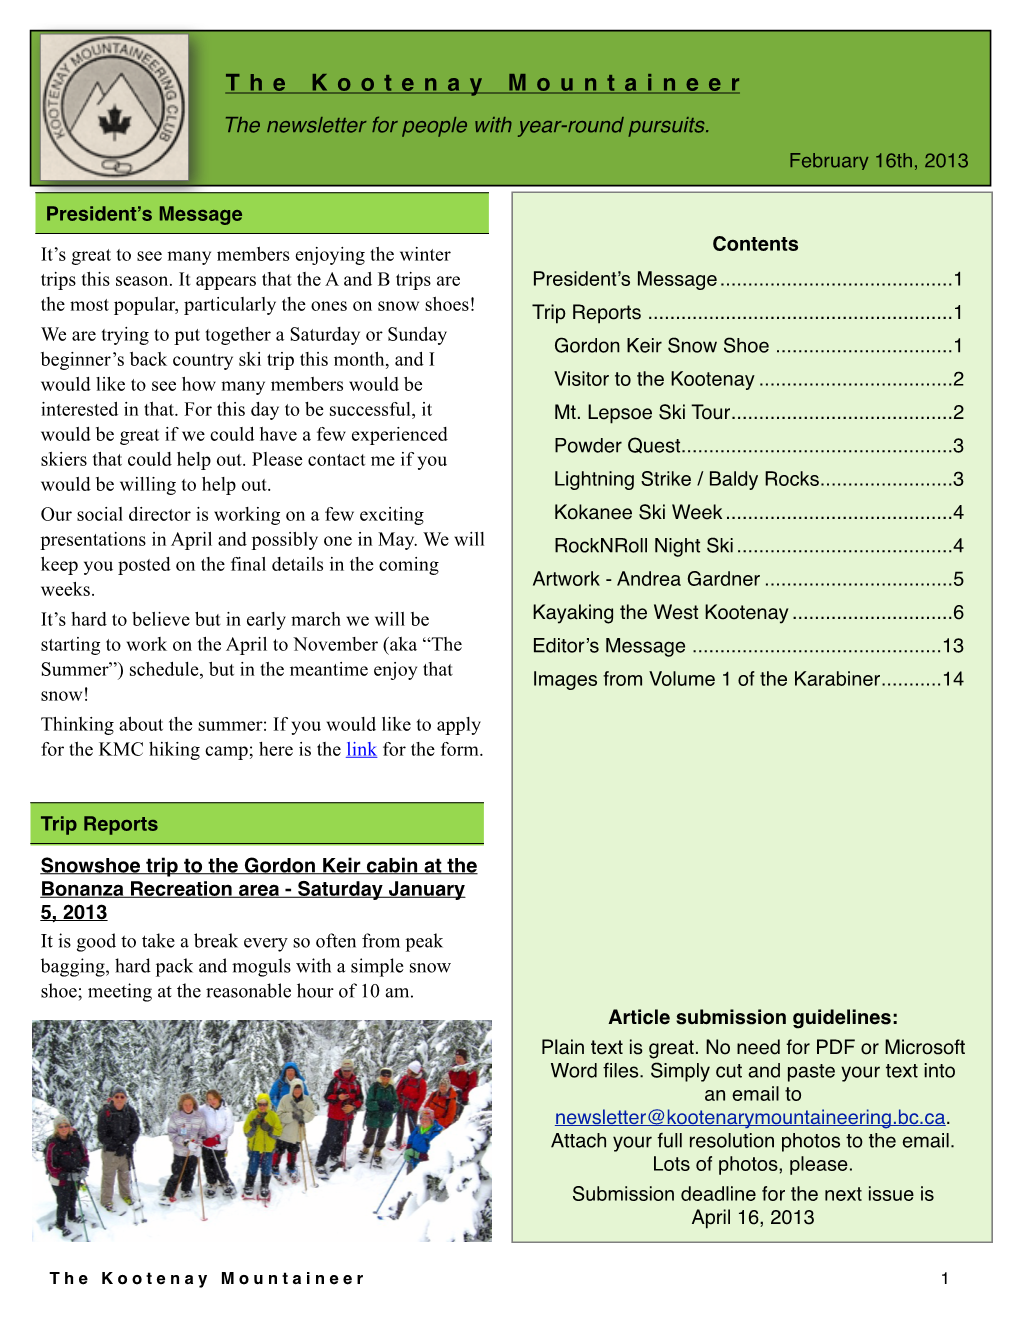 The Kootenay Mountaineer the Newsletter for People with Year-Round Pursuits